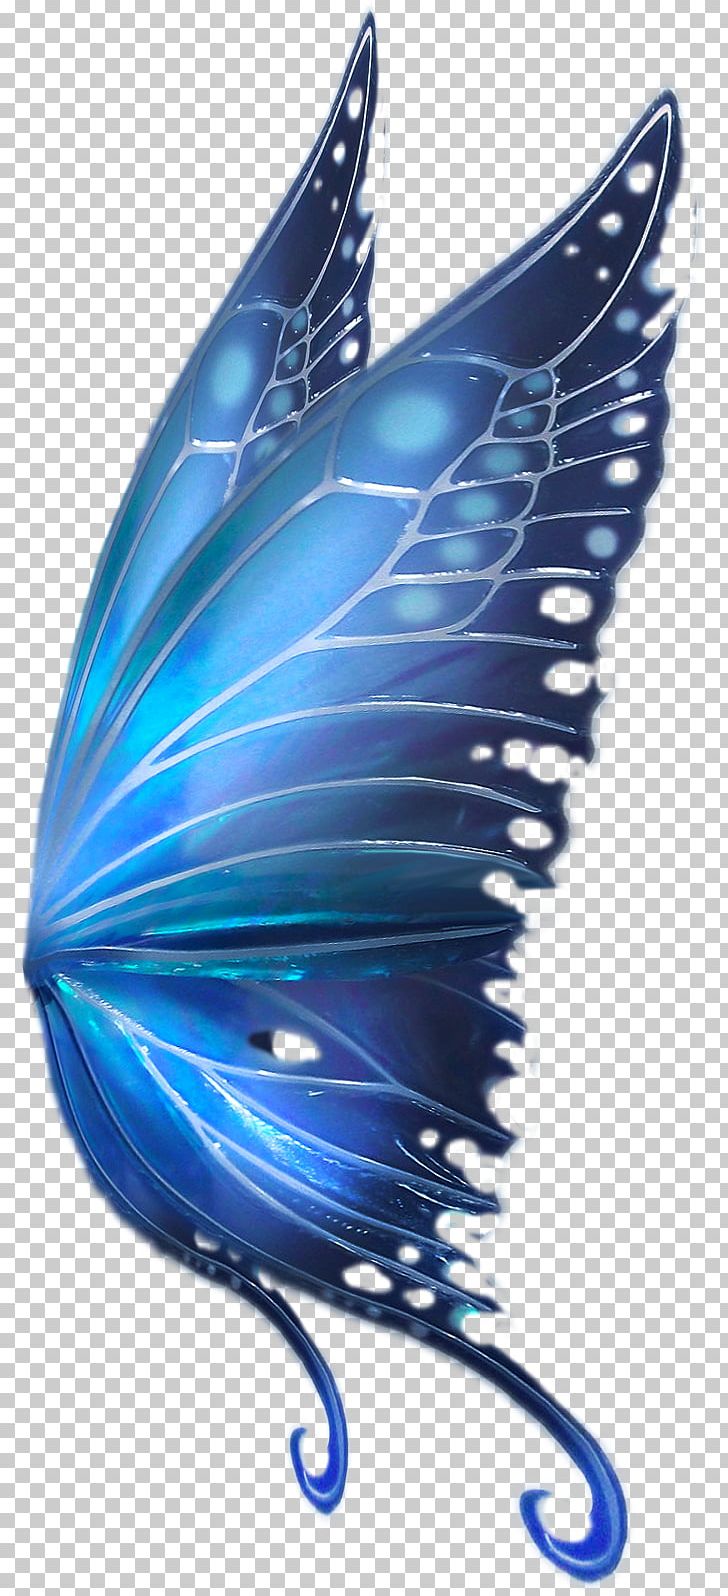 Butterfly Drawing Fairy Bird PNG, Clipart, Bird, Blue, Blue Butterfly, Butterflies And Moths, Butterfly Free PNG Download